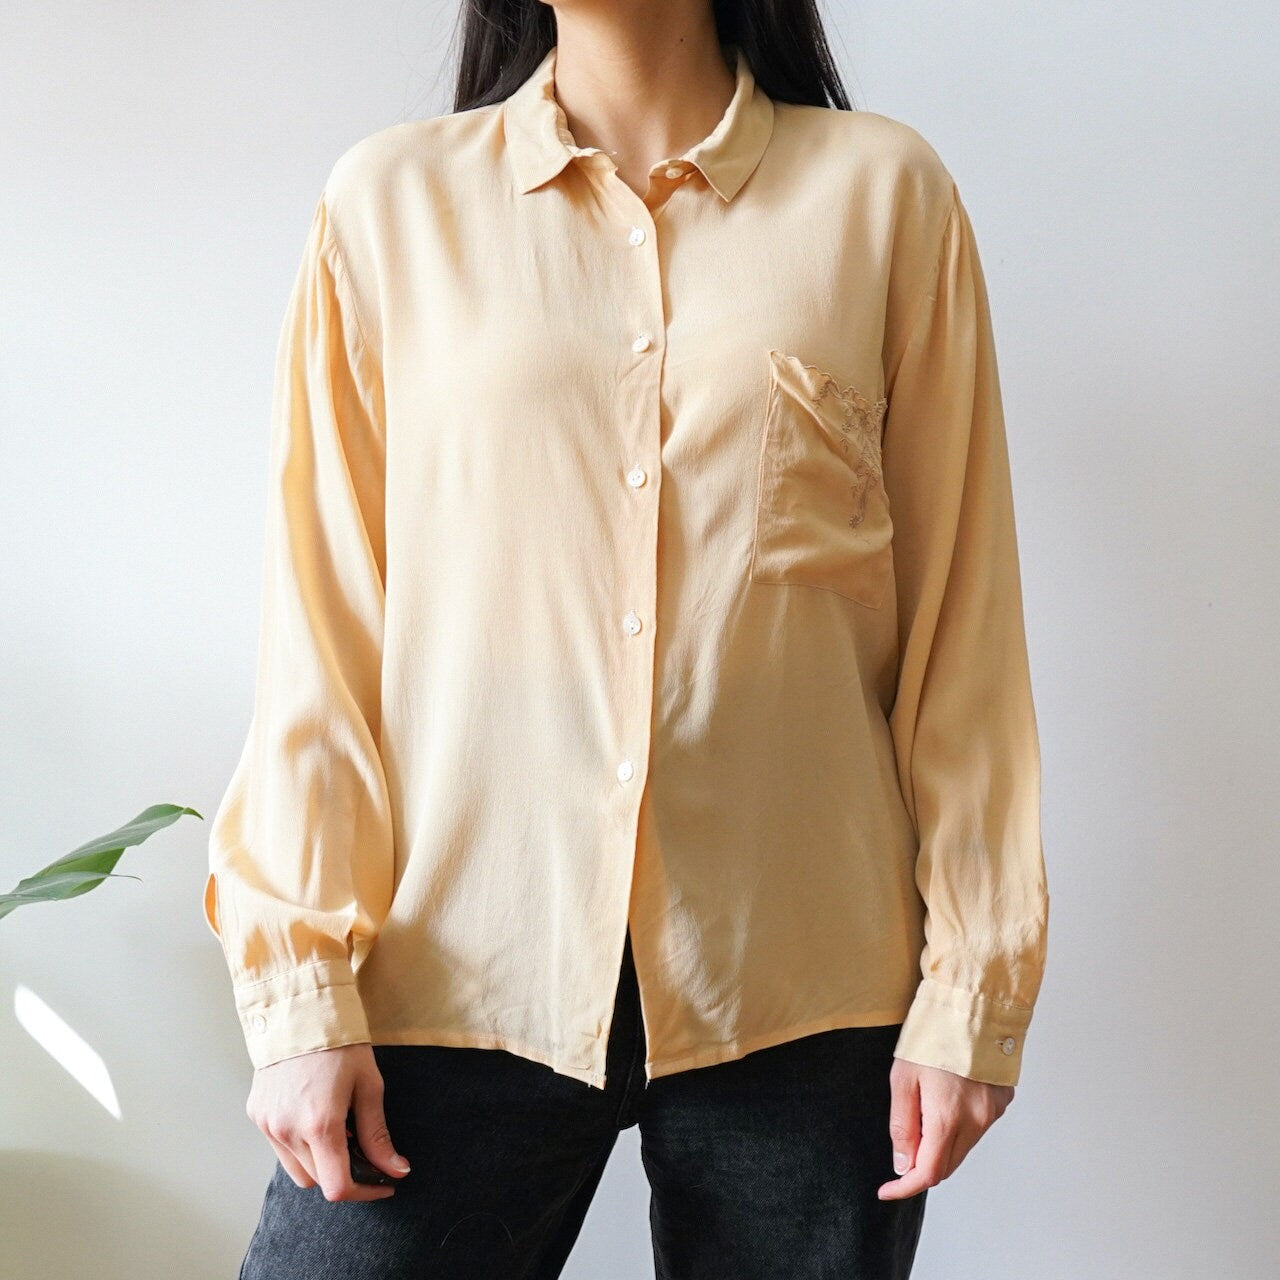 Vintage silk mix blouse Size M long sleeved blouse silk blouse embroidery details